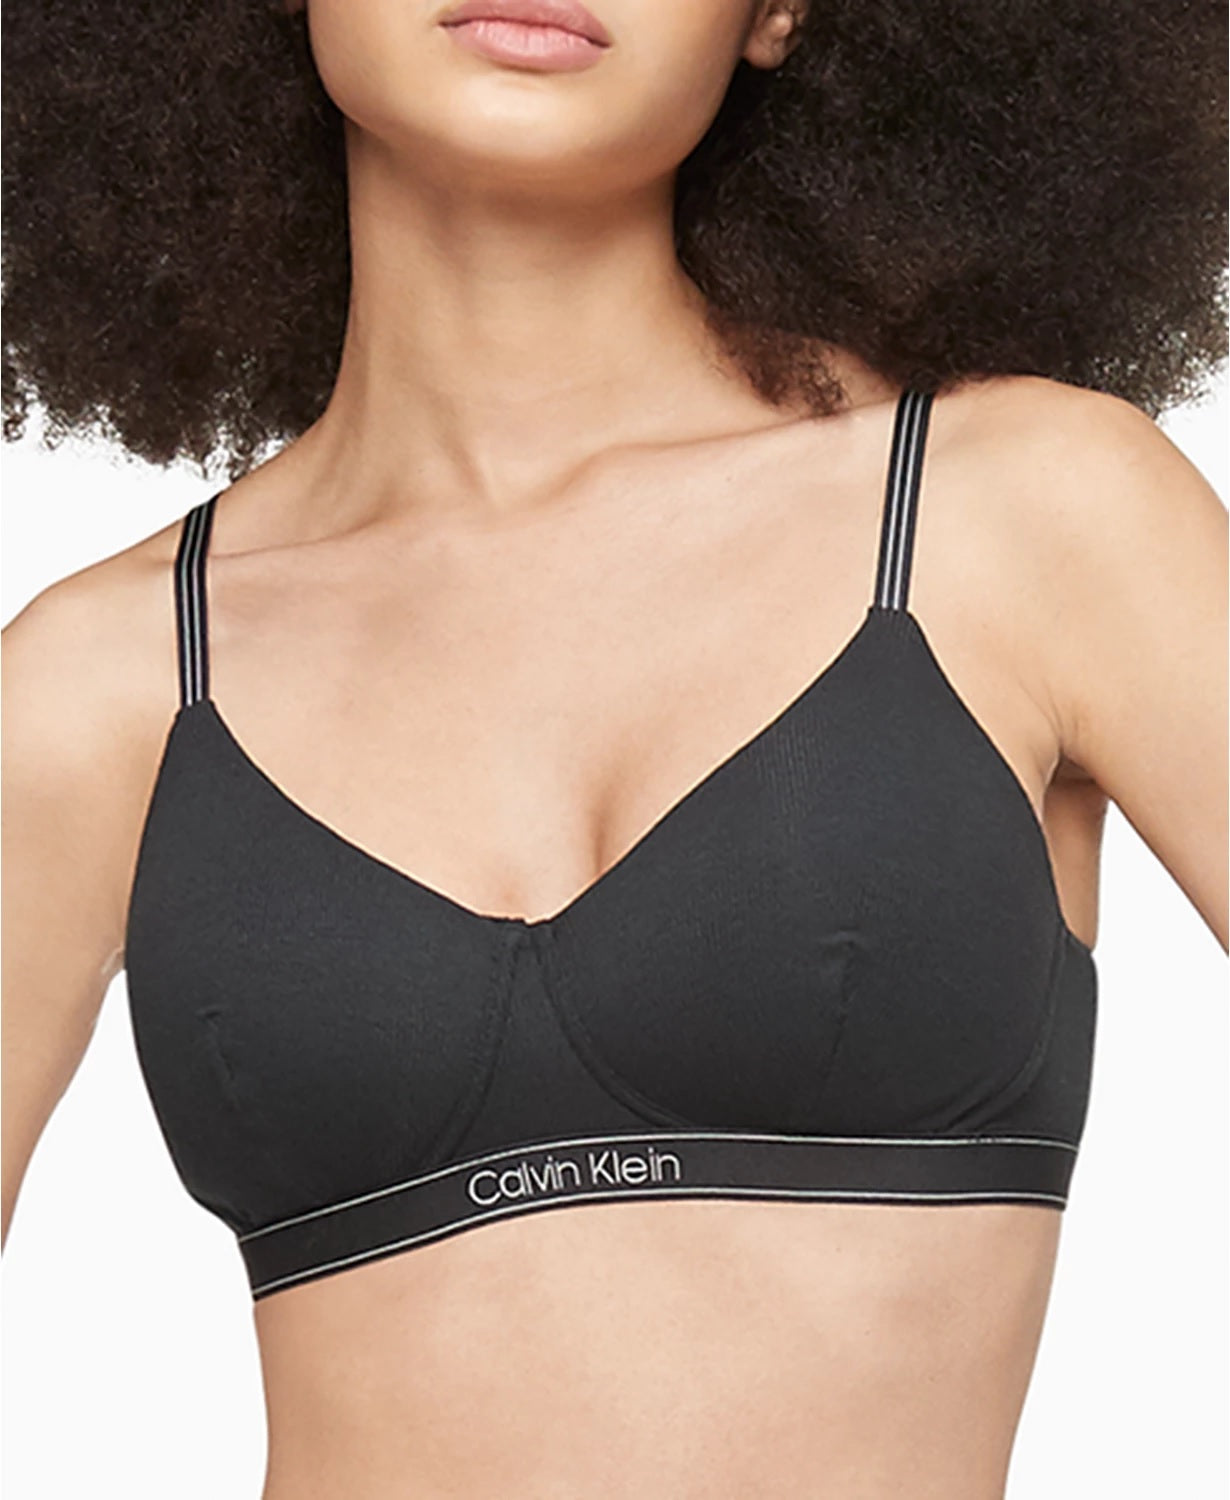 Calvin Klein] Women's Pure Ribbed Light Lined Bralette QF6439-001